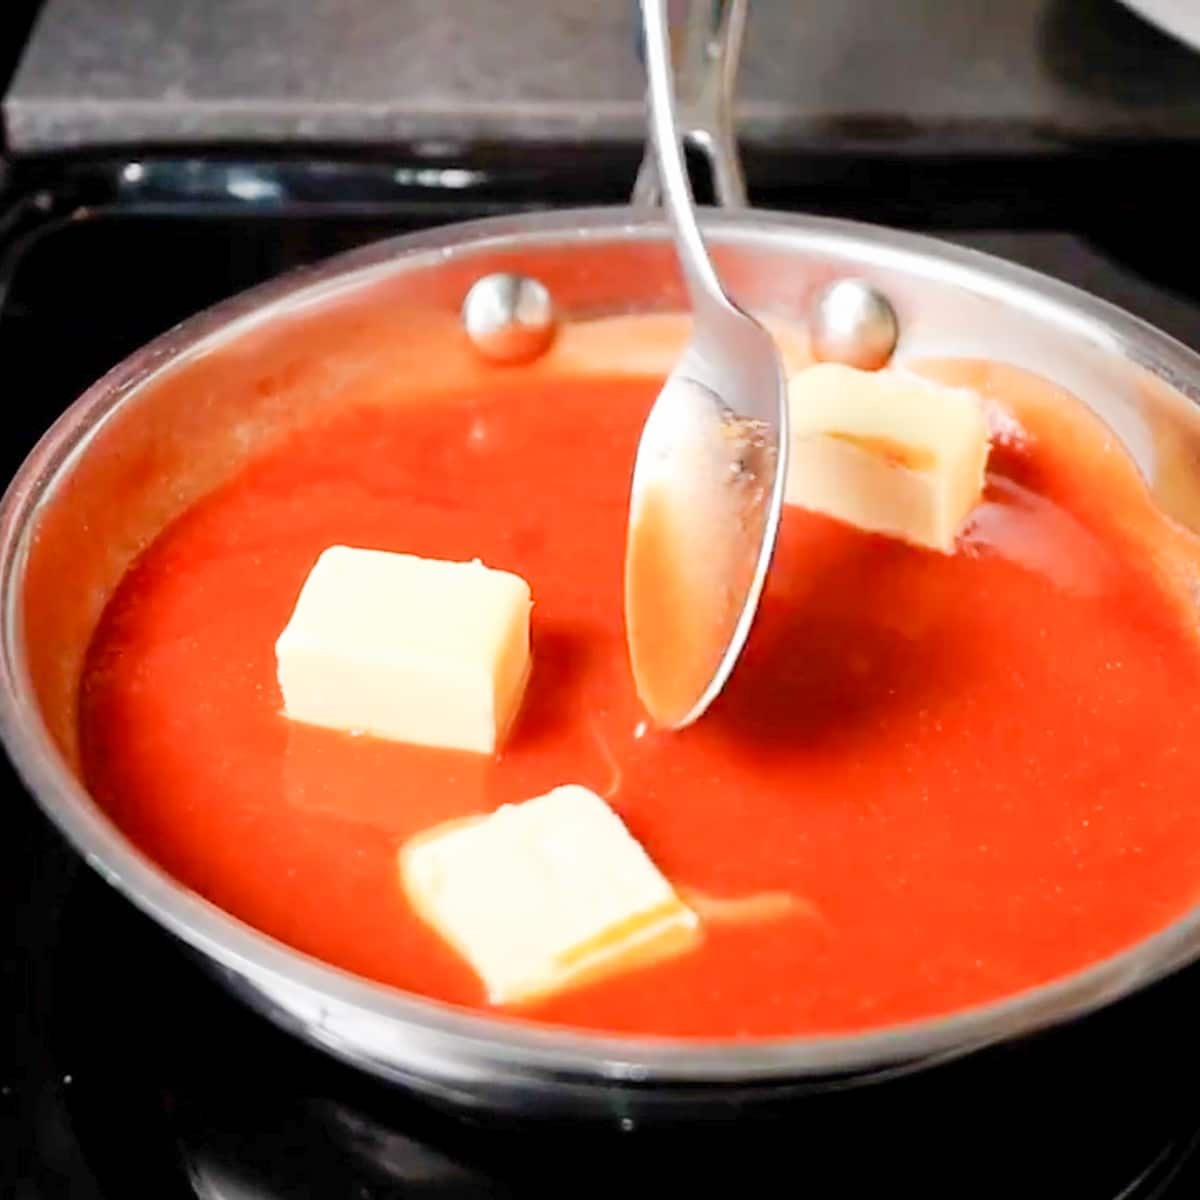 adding and mixing the butter to the hot sauce